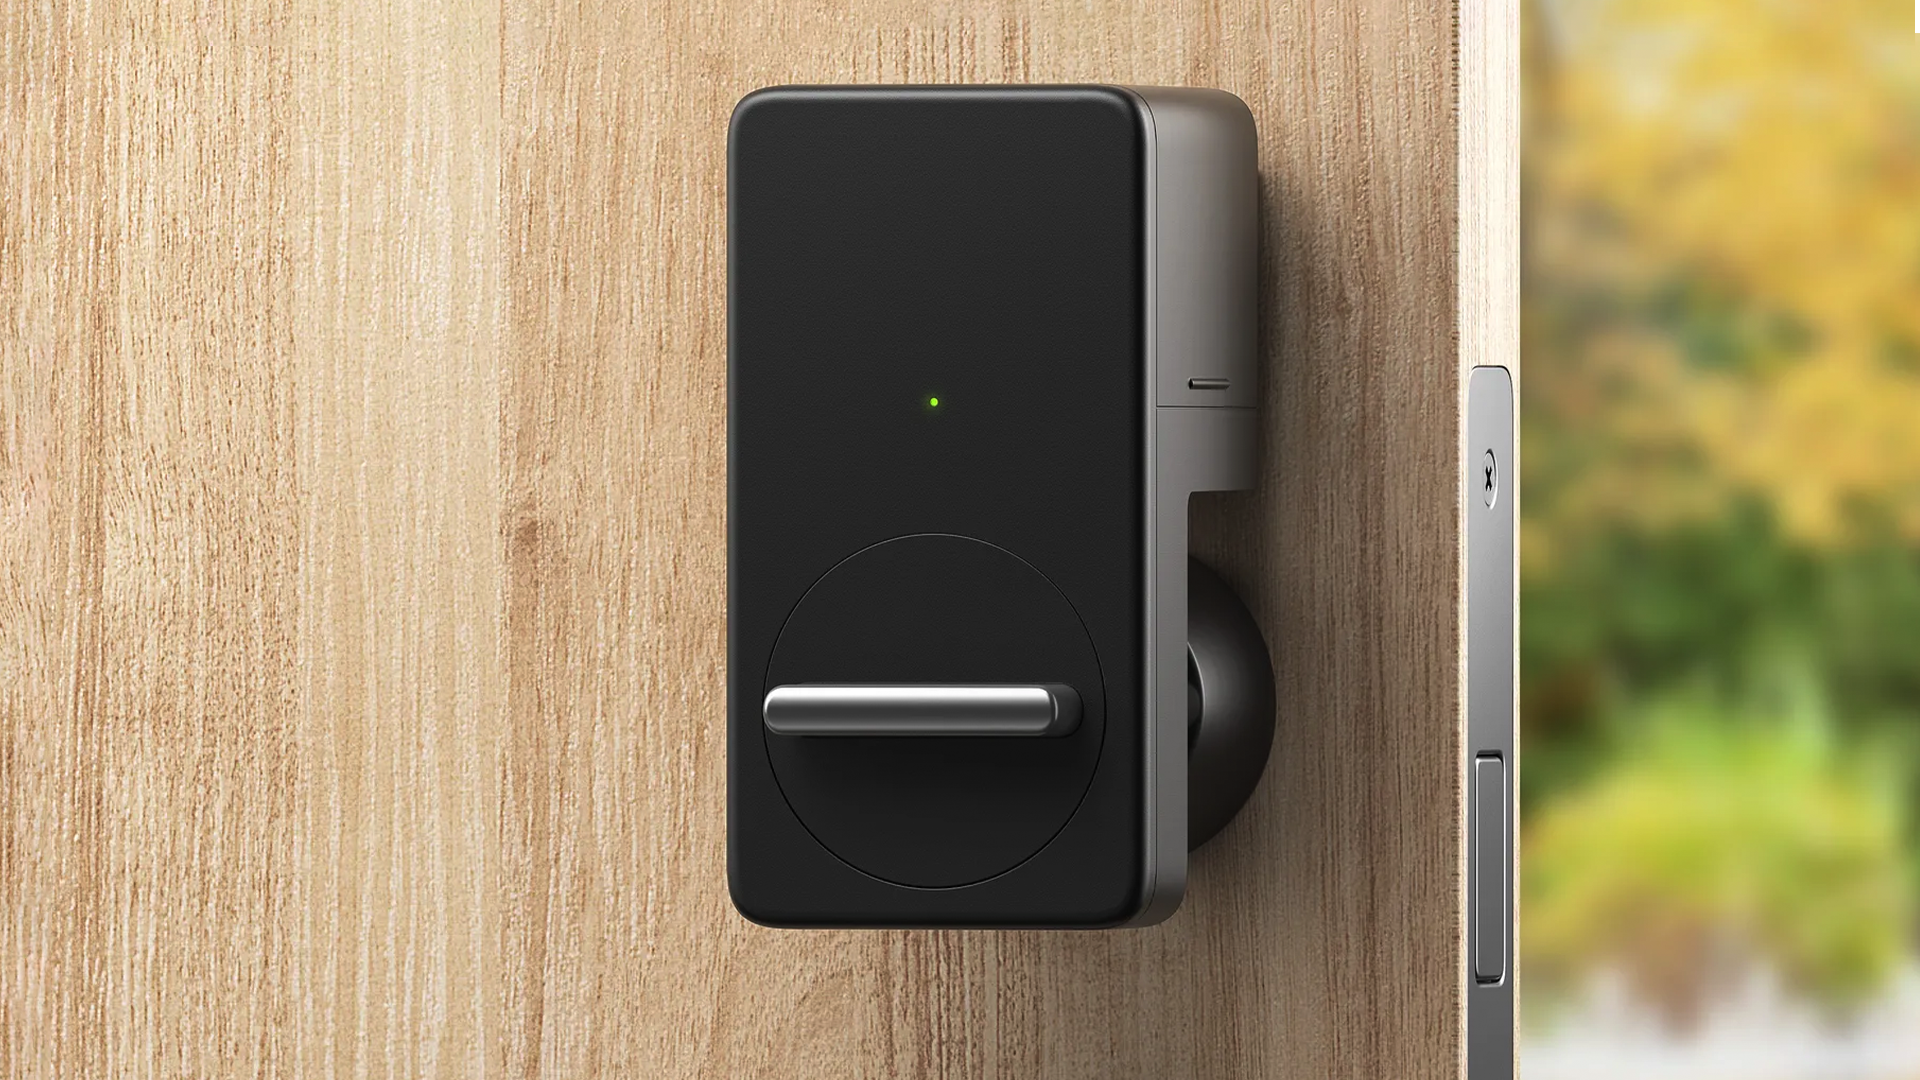 The SwitchBot Wi-Fi smart lock on a door.